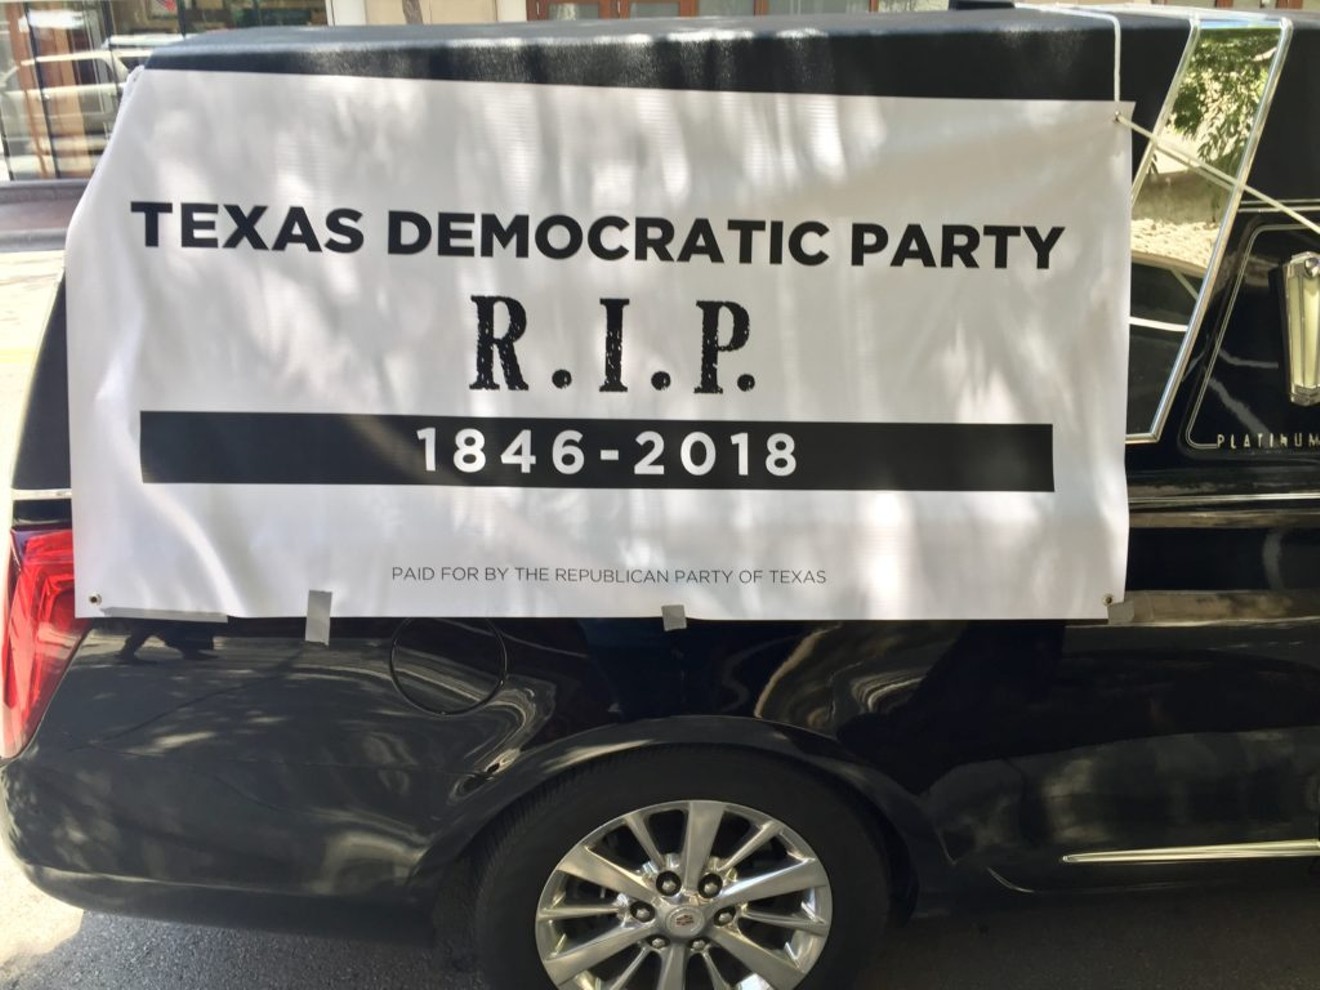 The Democratic Party can't win in Texas because it's dead, the state GOP says.